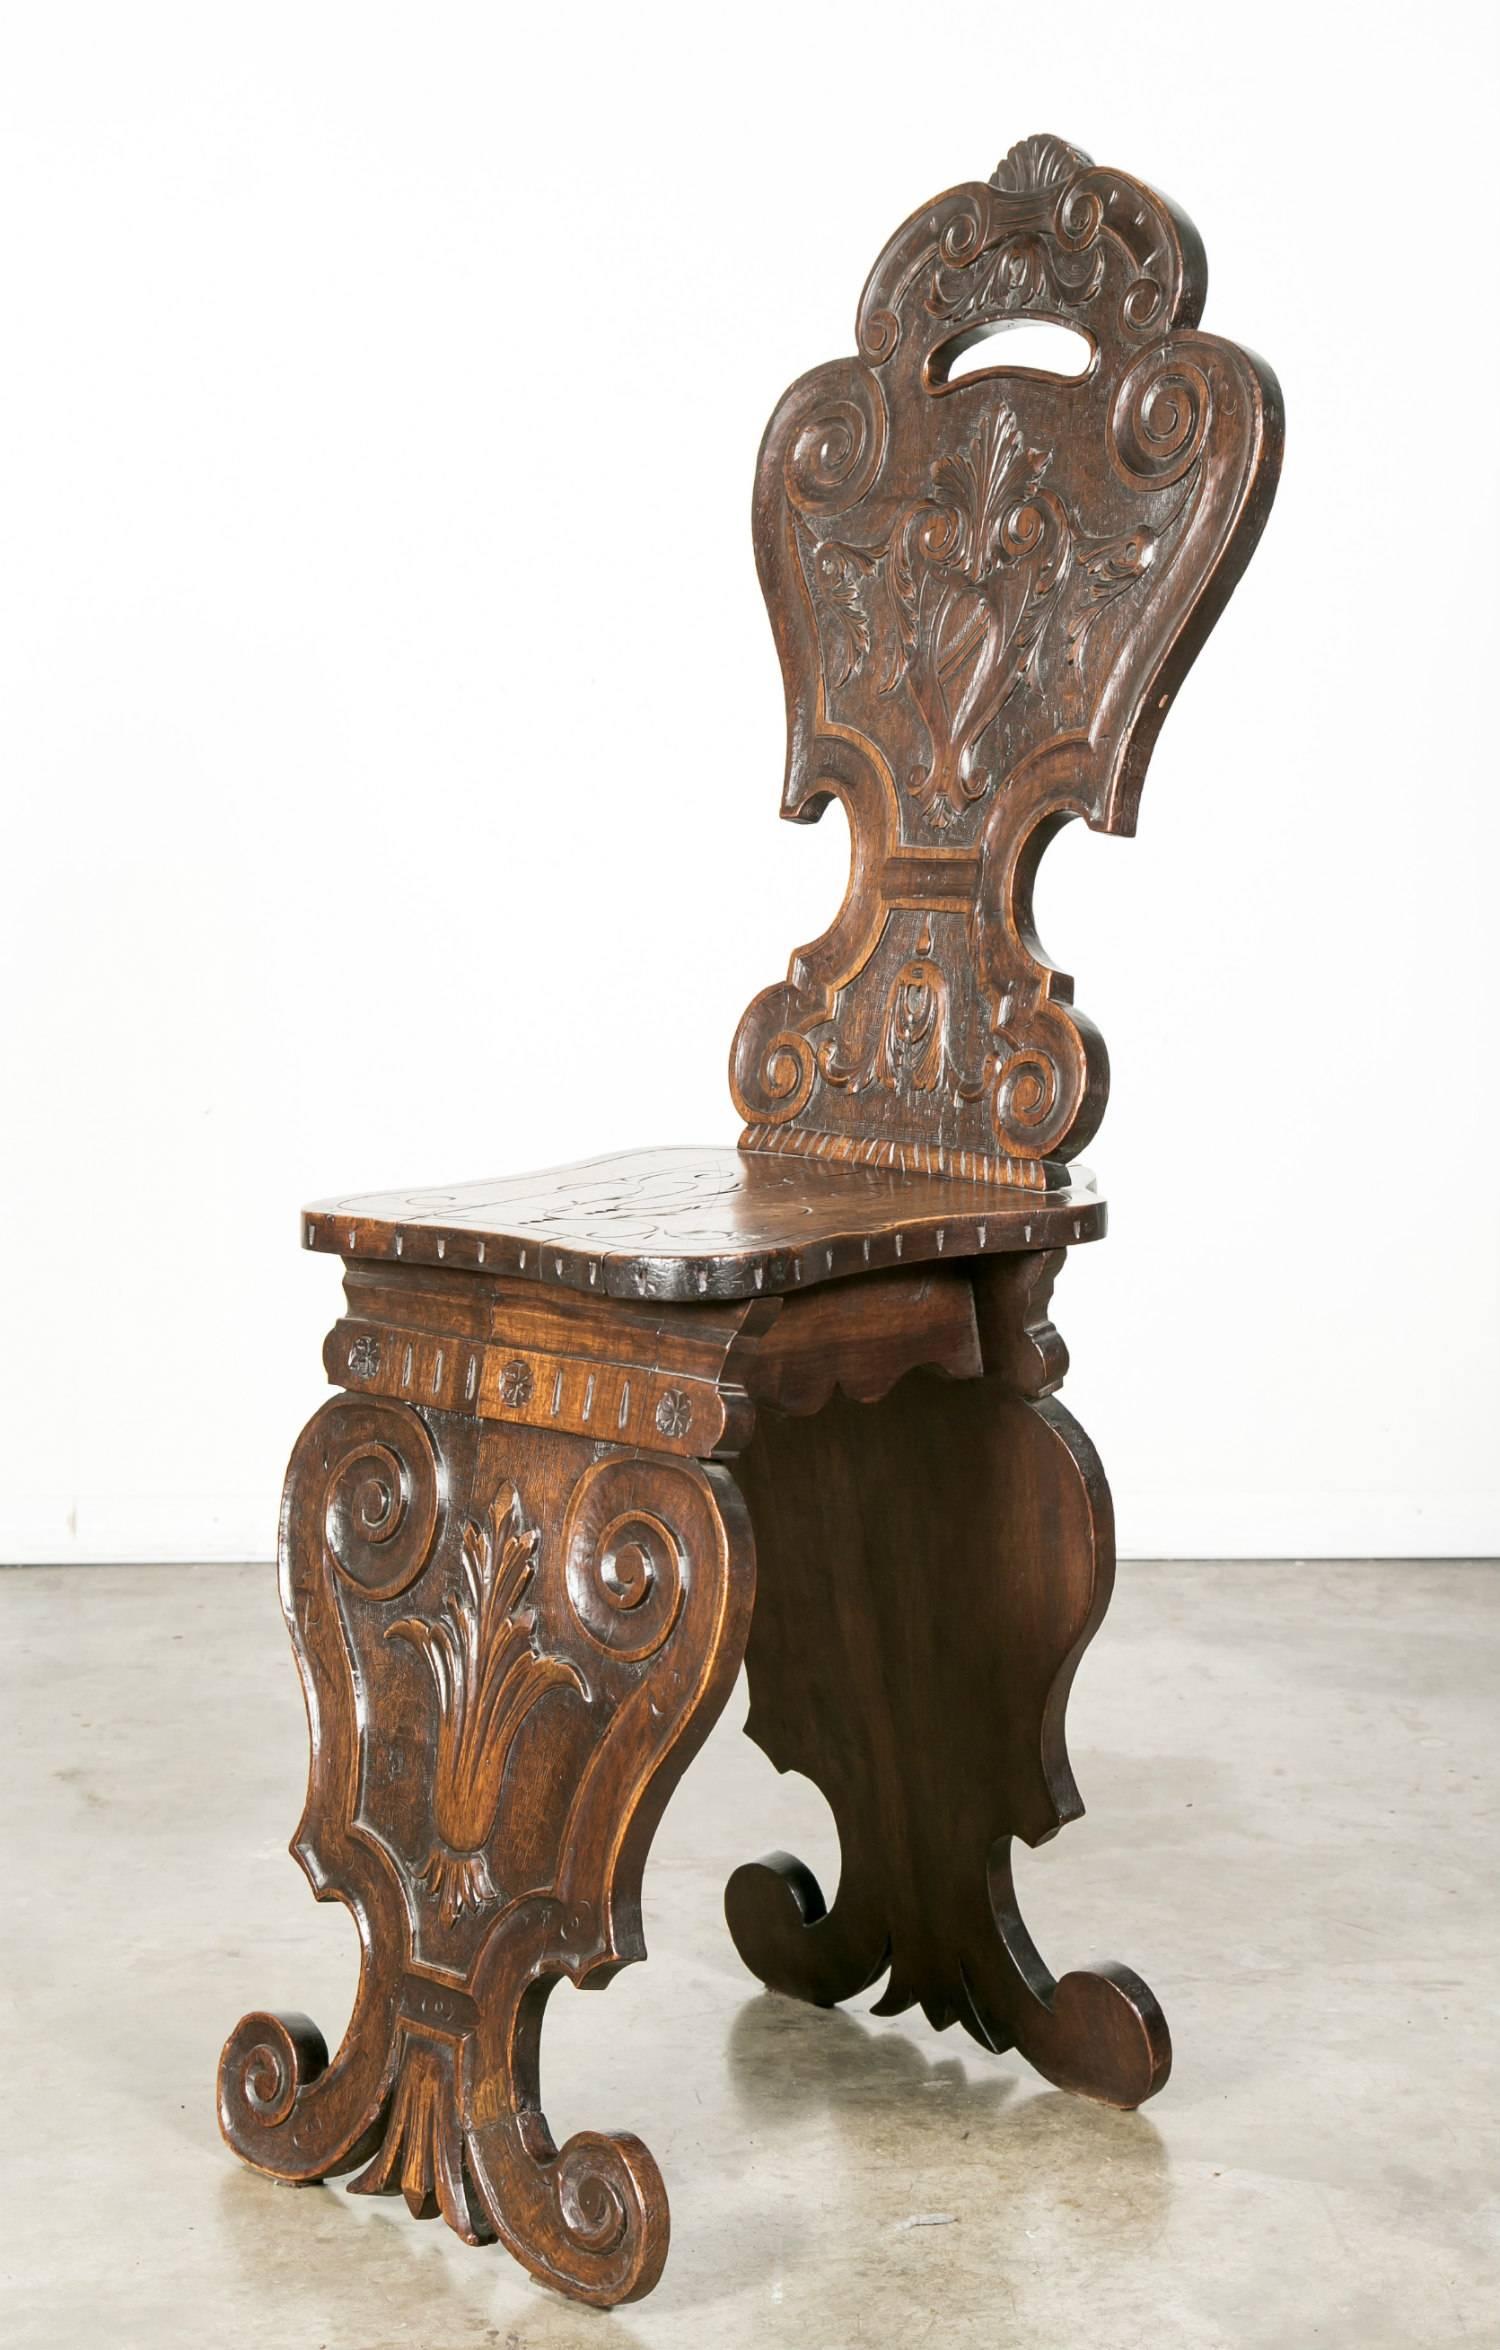 A wonderful 18th century Italian carved walnut Sgabello chair. The entire surface is covered with boldly carved decoration from top to bottom with the seat having an incised decorated surface. The tall back has sculptural and symbolic carvings with